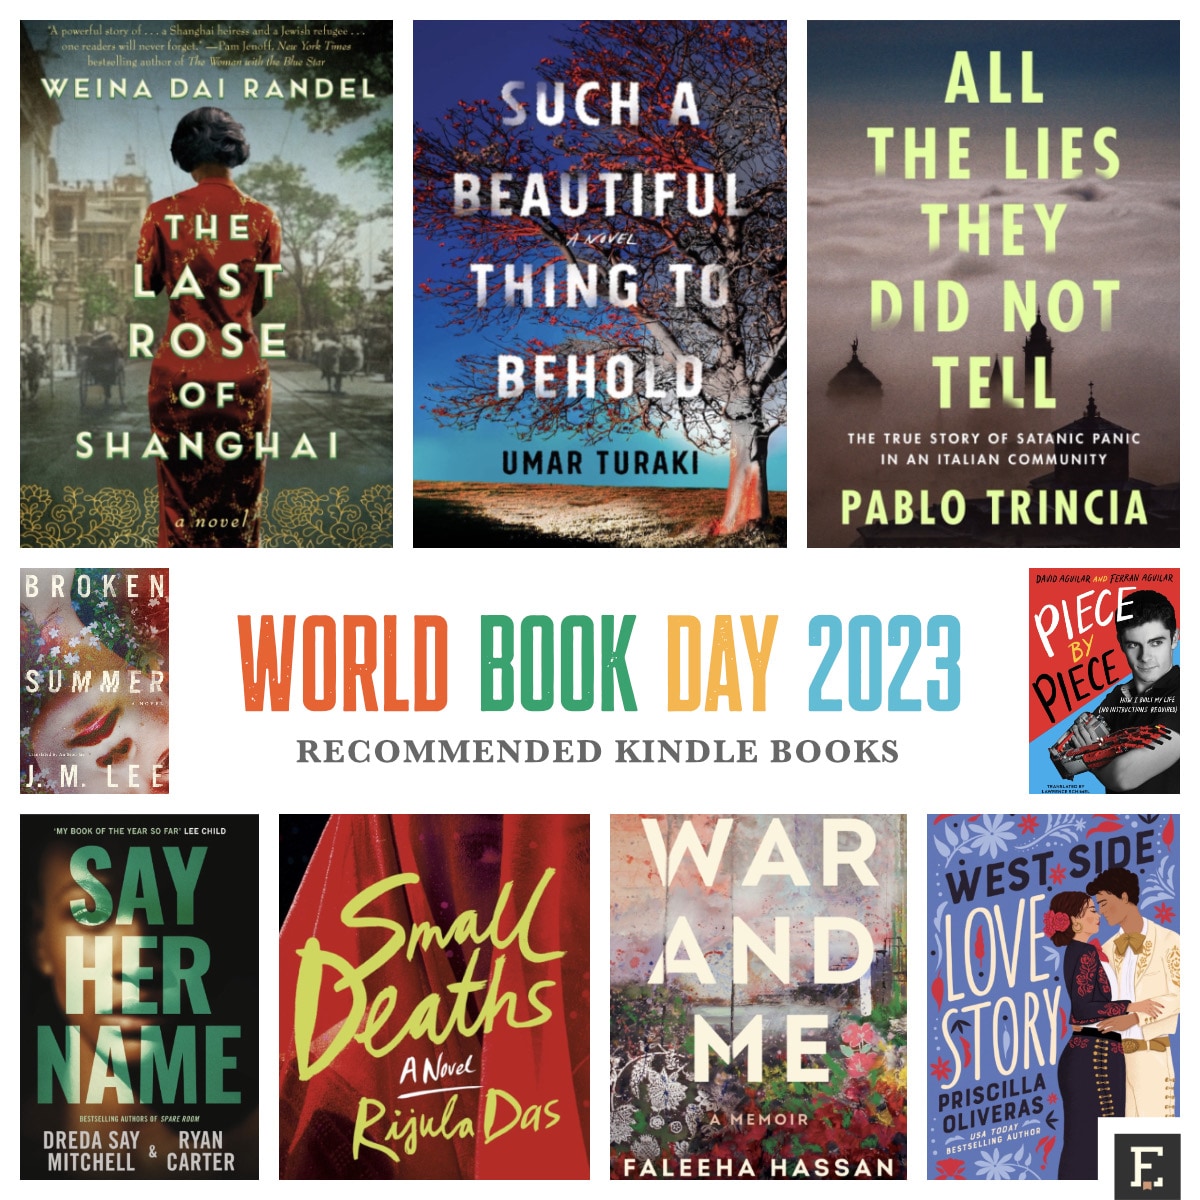 9 recommended Kindle books for World Book Day 2023